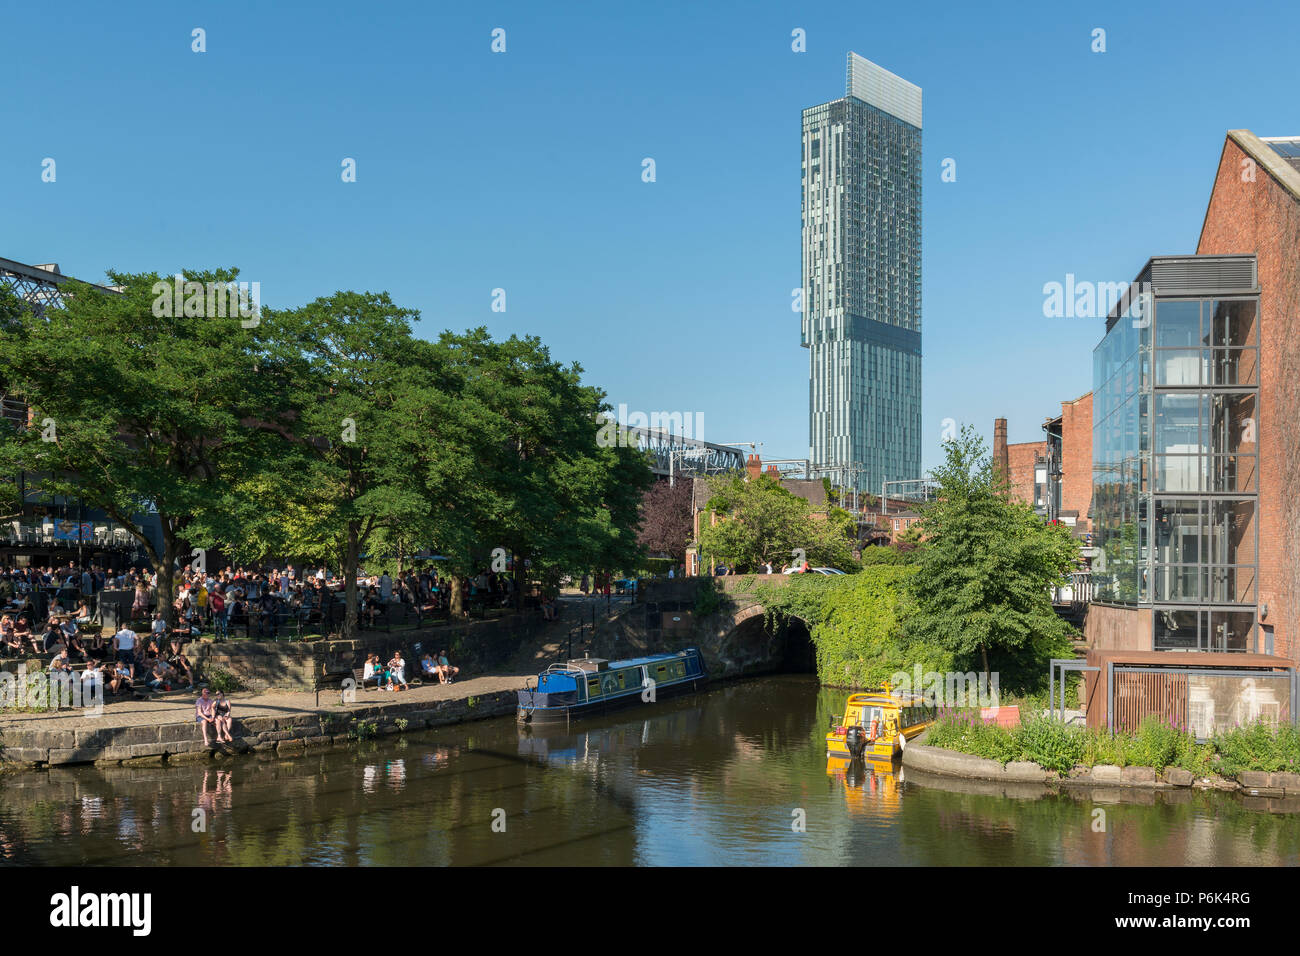 A general view of the Castlefield area of Manchester featuring people socialising on a warm summer's day. Stock Photo